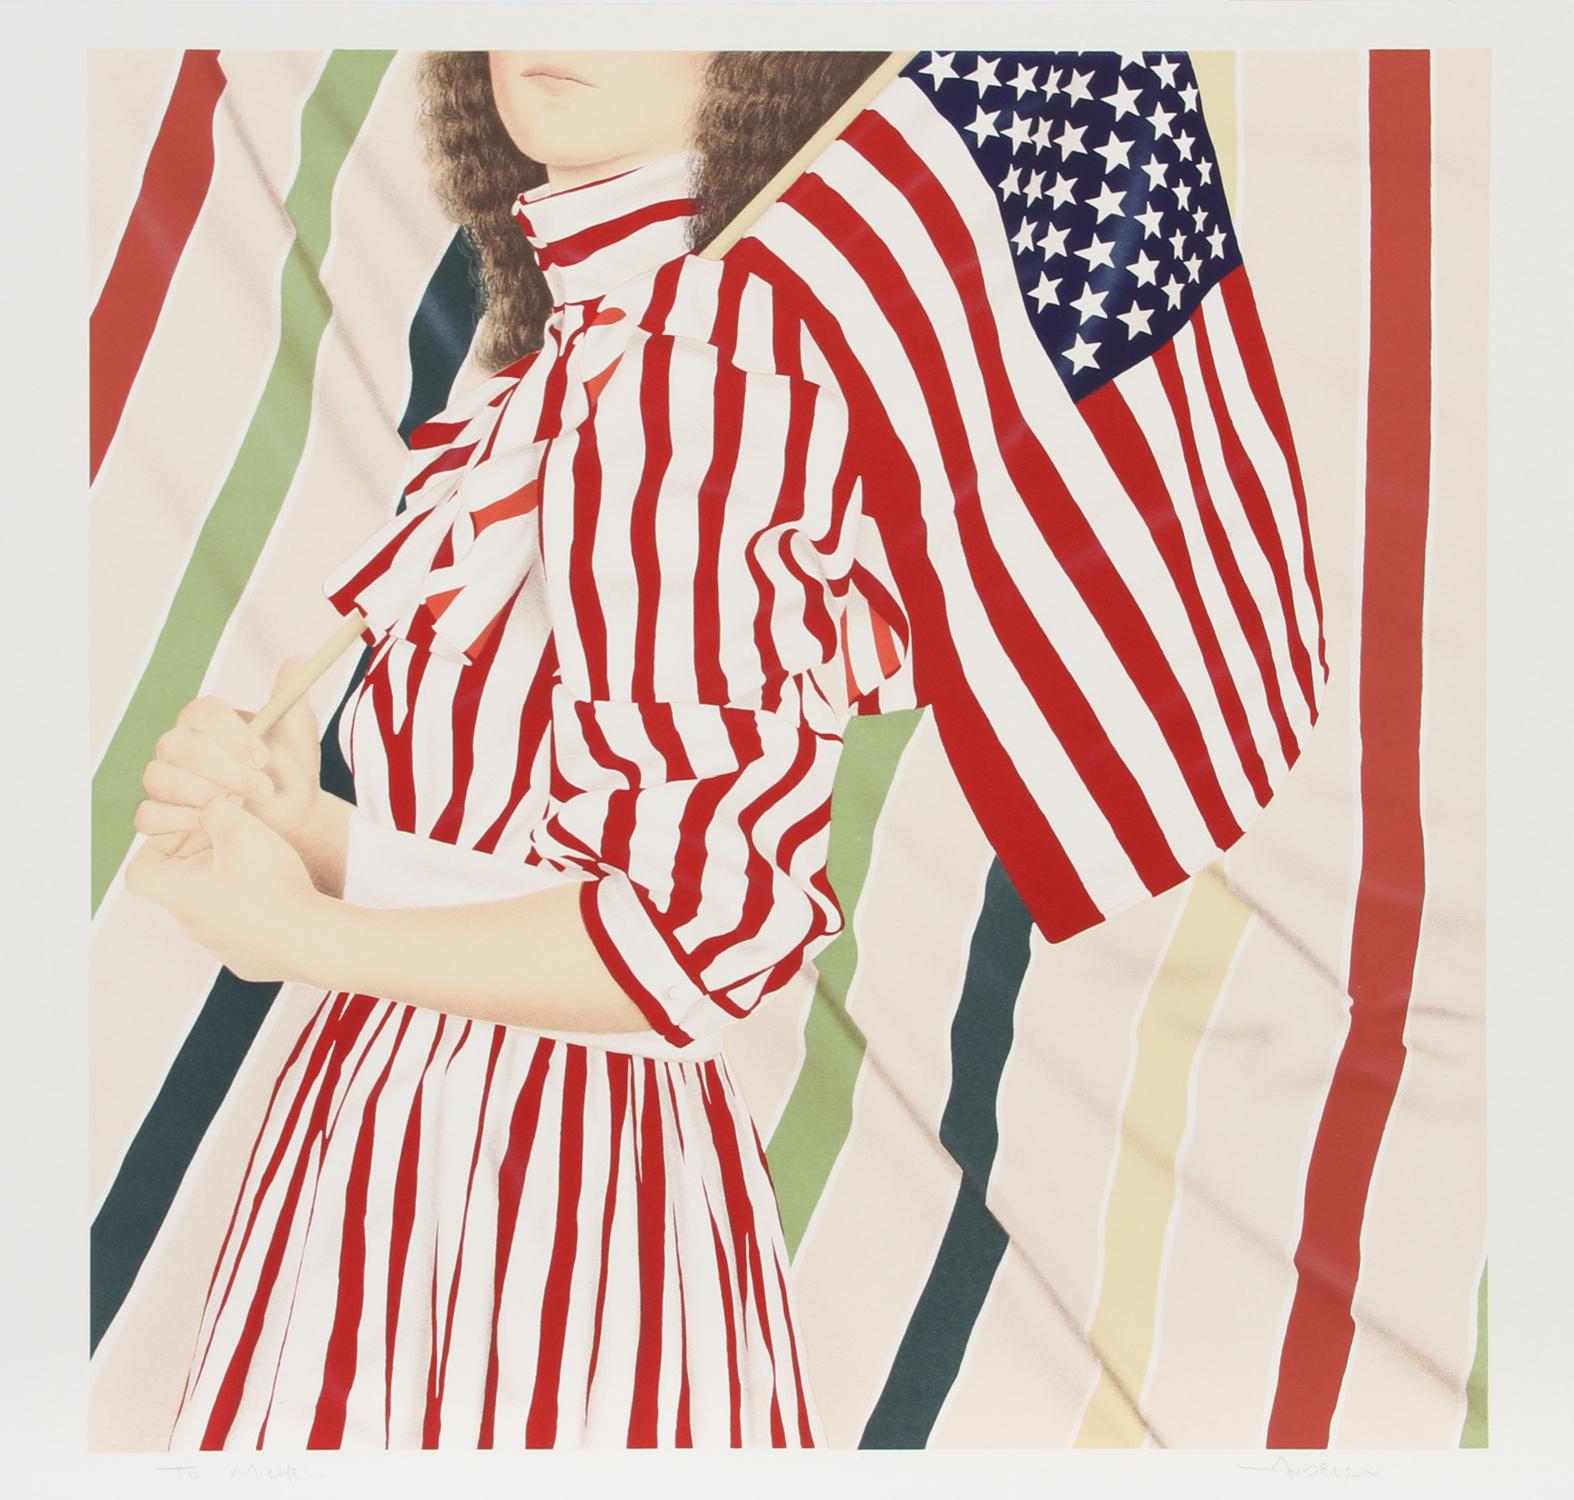 American Girl (Stars and Stripes), Lithograph by Robert Anderson